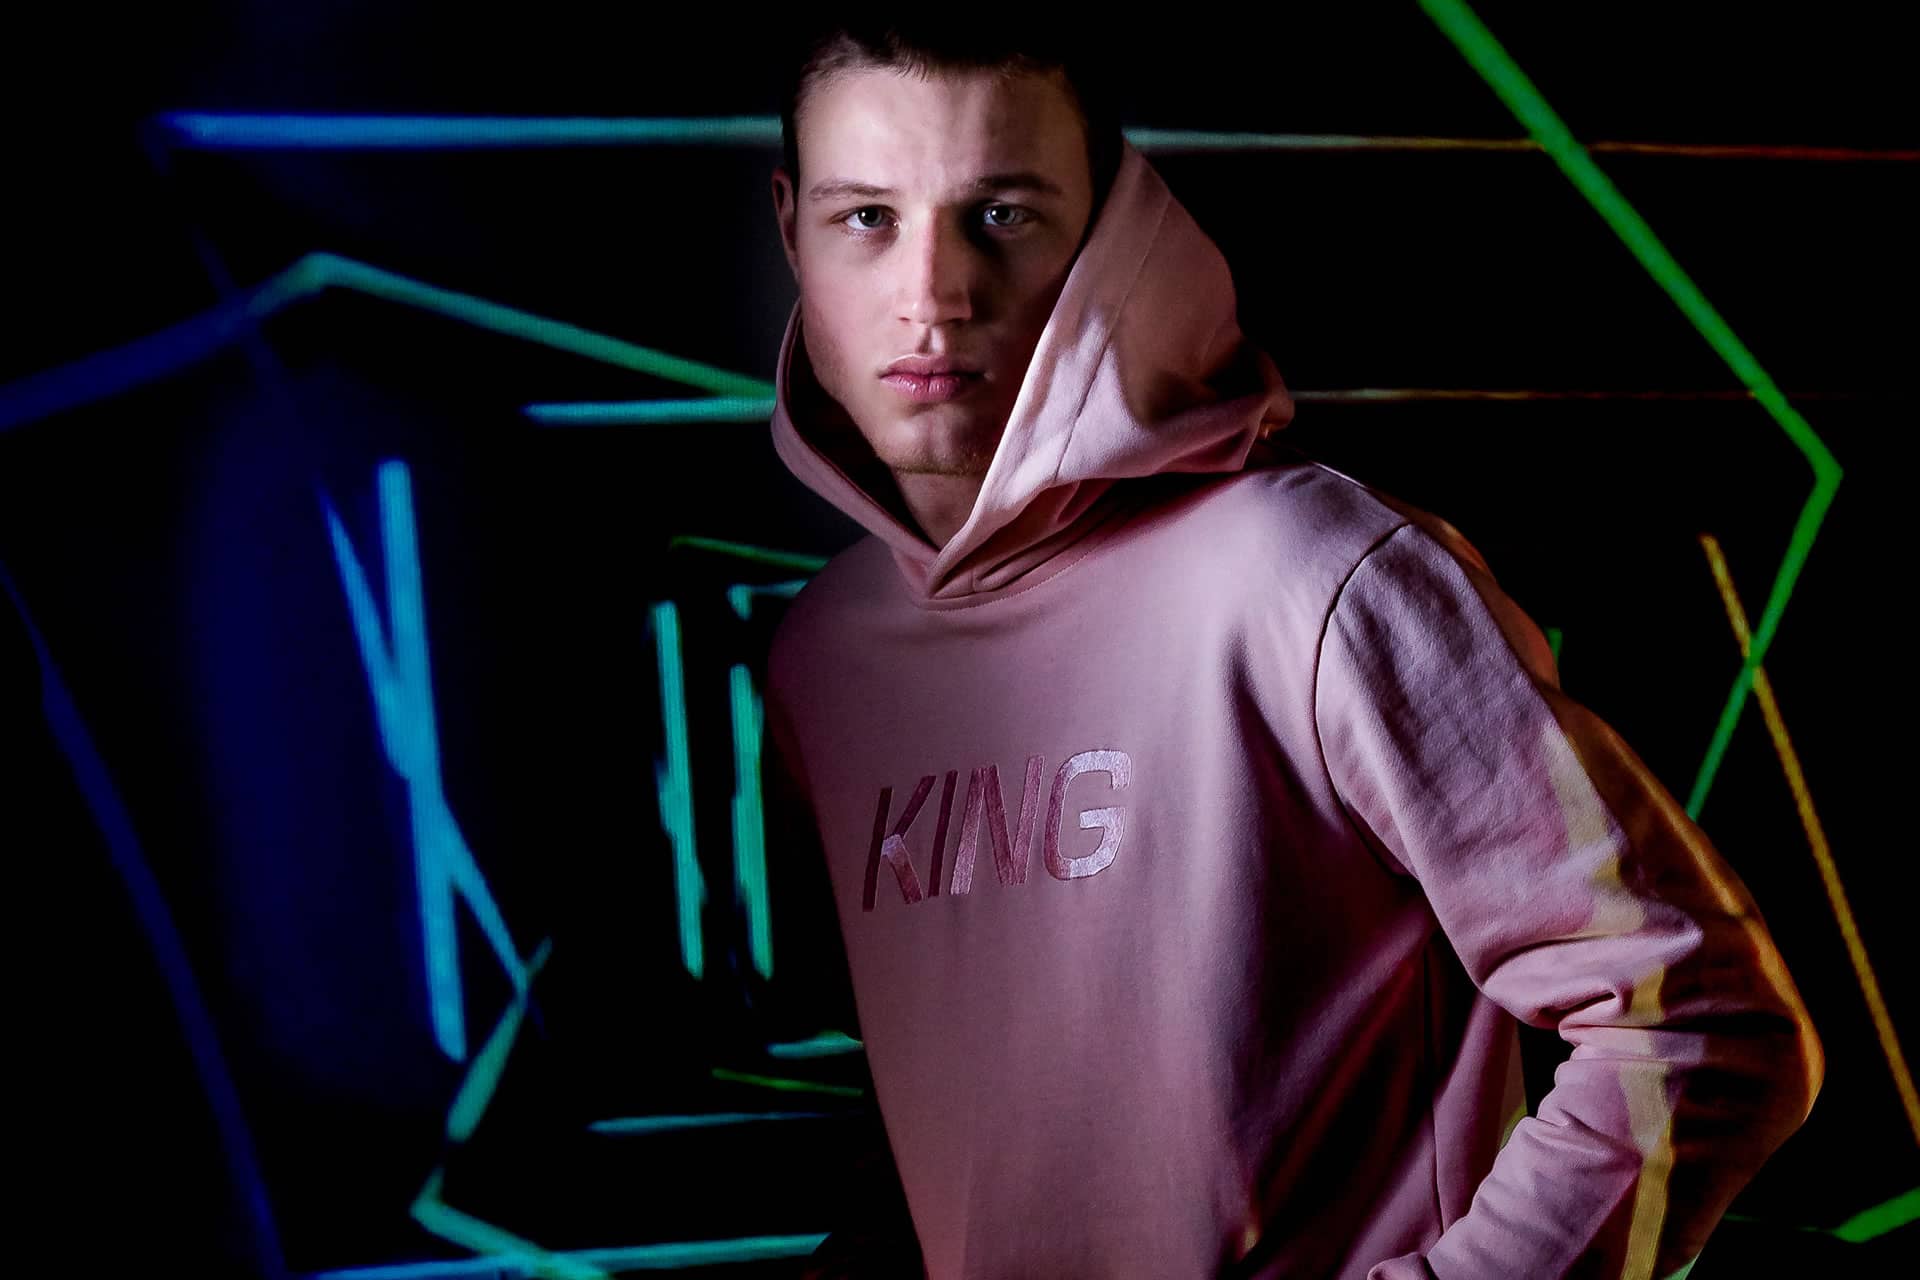 Model wears hoodie from King Apparel Autumn / Winter 2018 collection